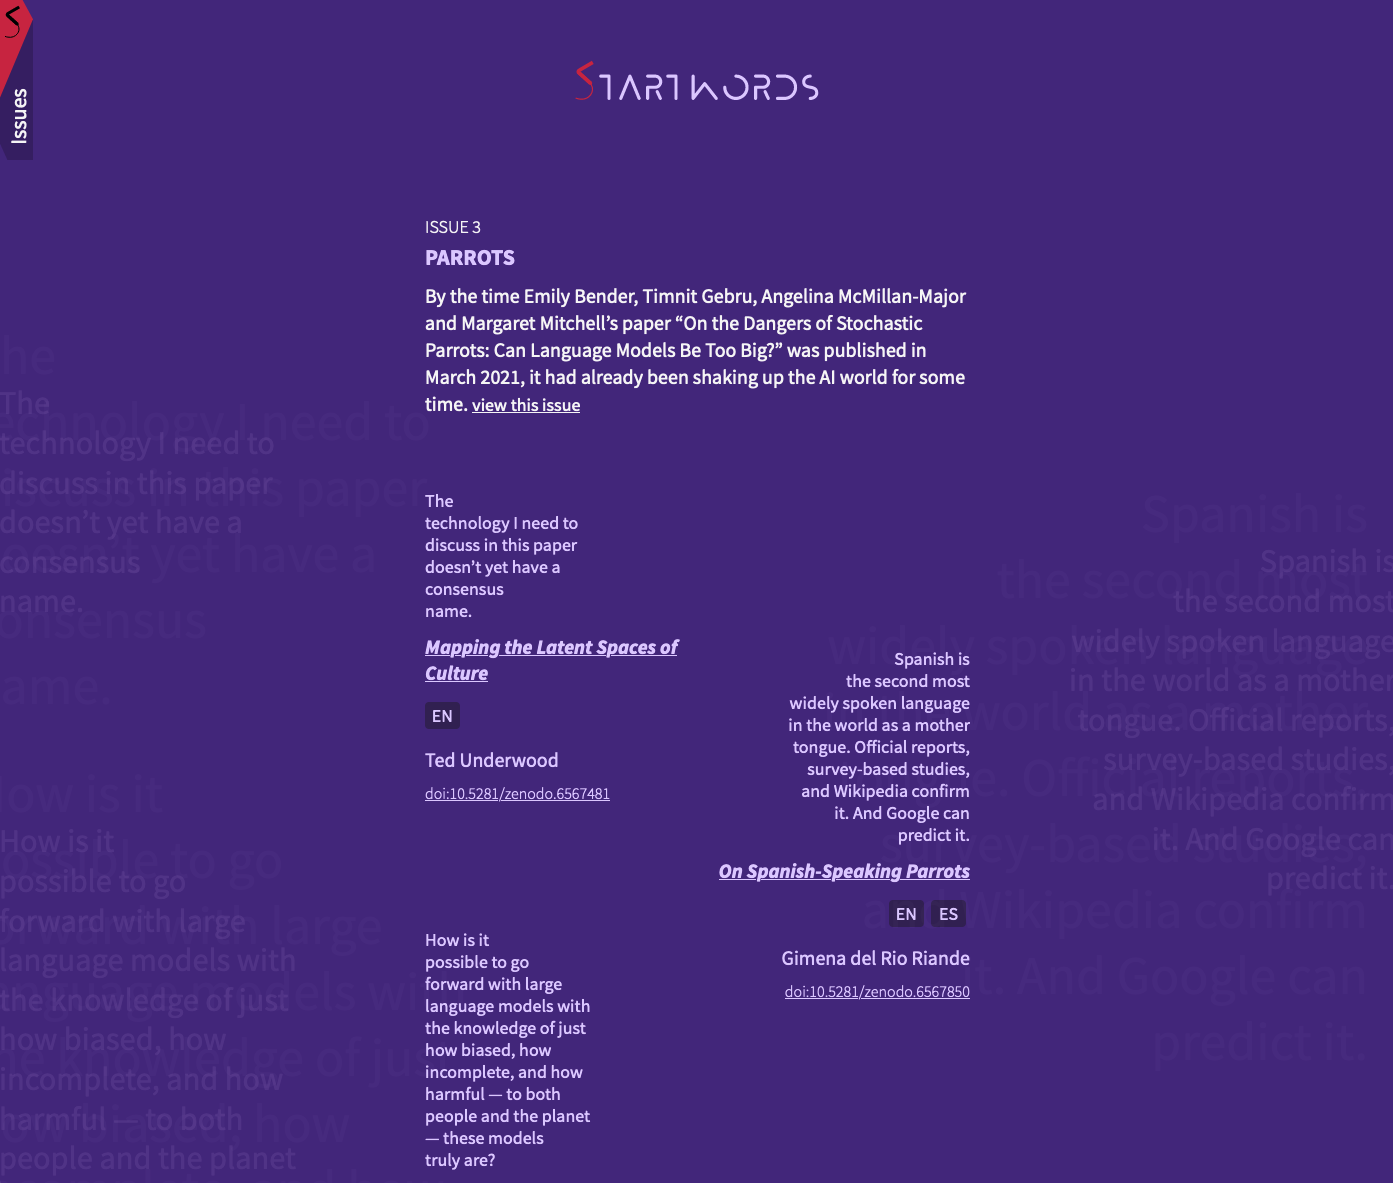 Screenshot of the development version of Startwords showing the newly redesigned and reimplemented text shadows and three-feature essay layout.